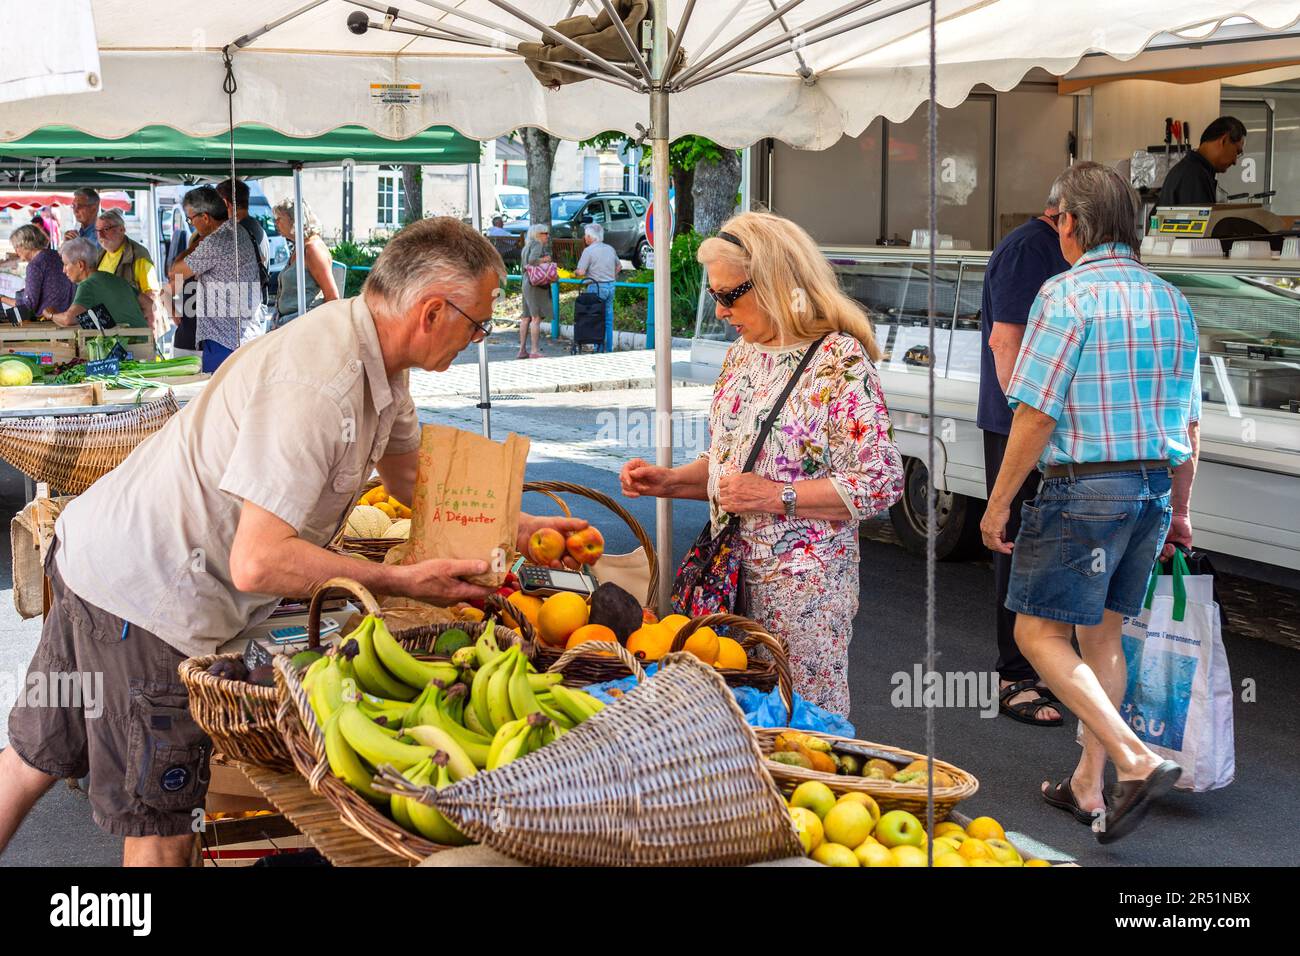 Market trader selling fruit and vegetables to customer on market day - La Roche Posay, Vienne (86), France. Stock Photo